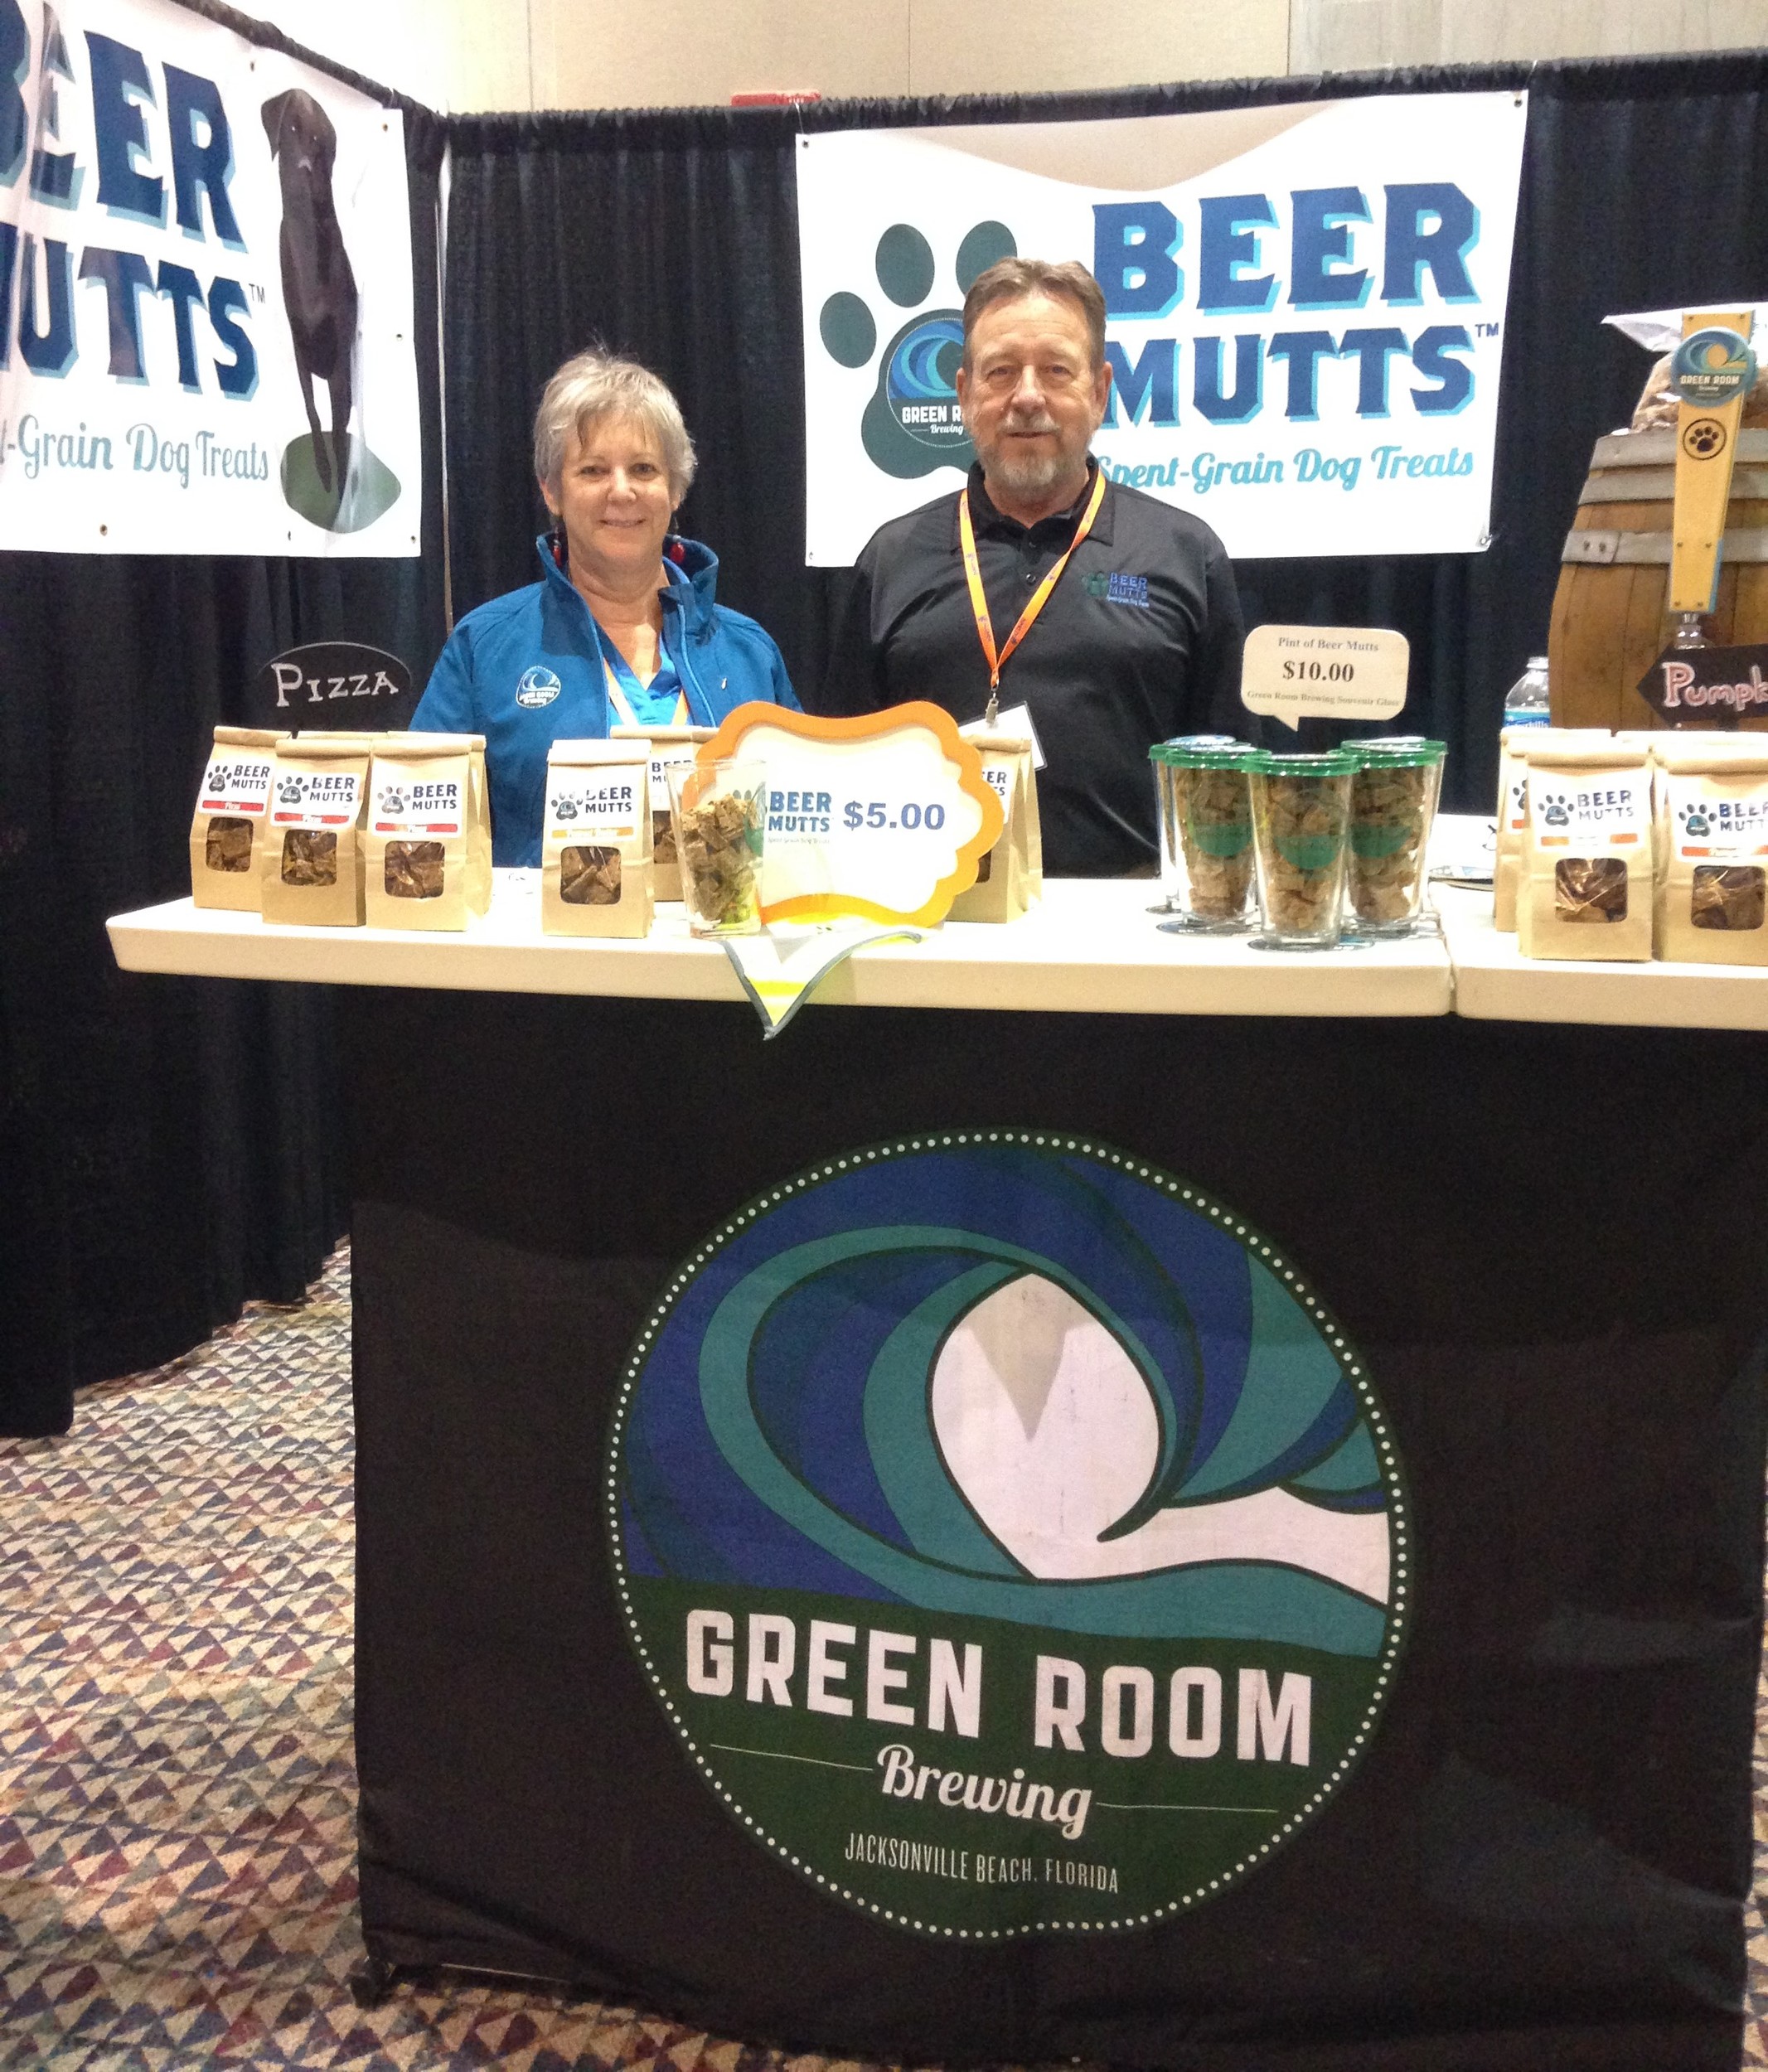 Debra and Bill Logeson of Beer Mutts dog treats at Jacksonville’s 2016 Spring Home & Patio Show.